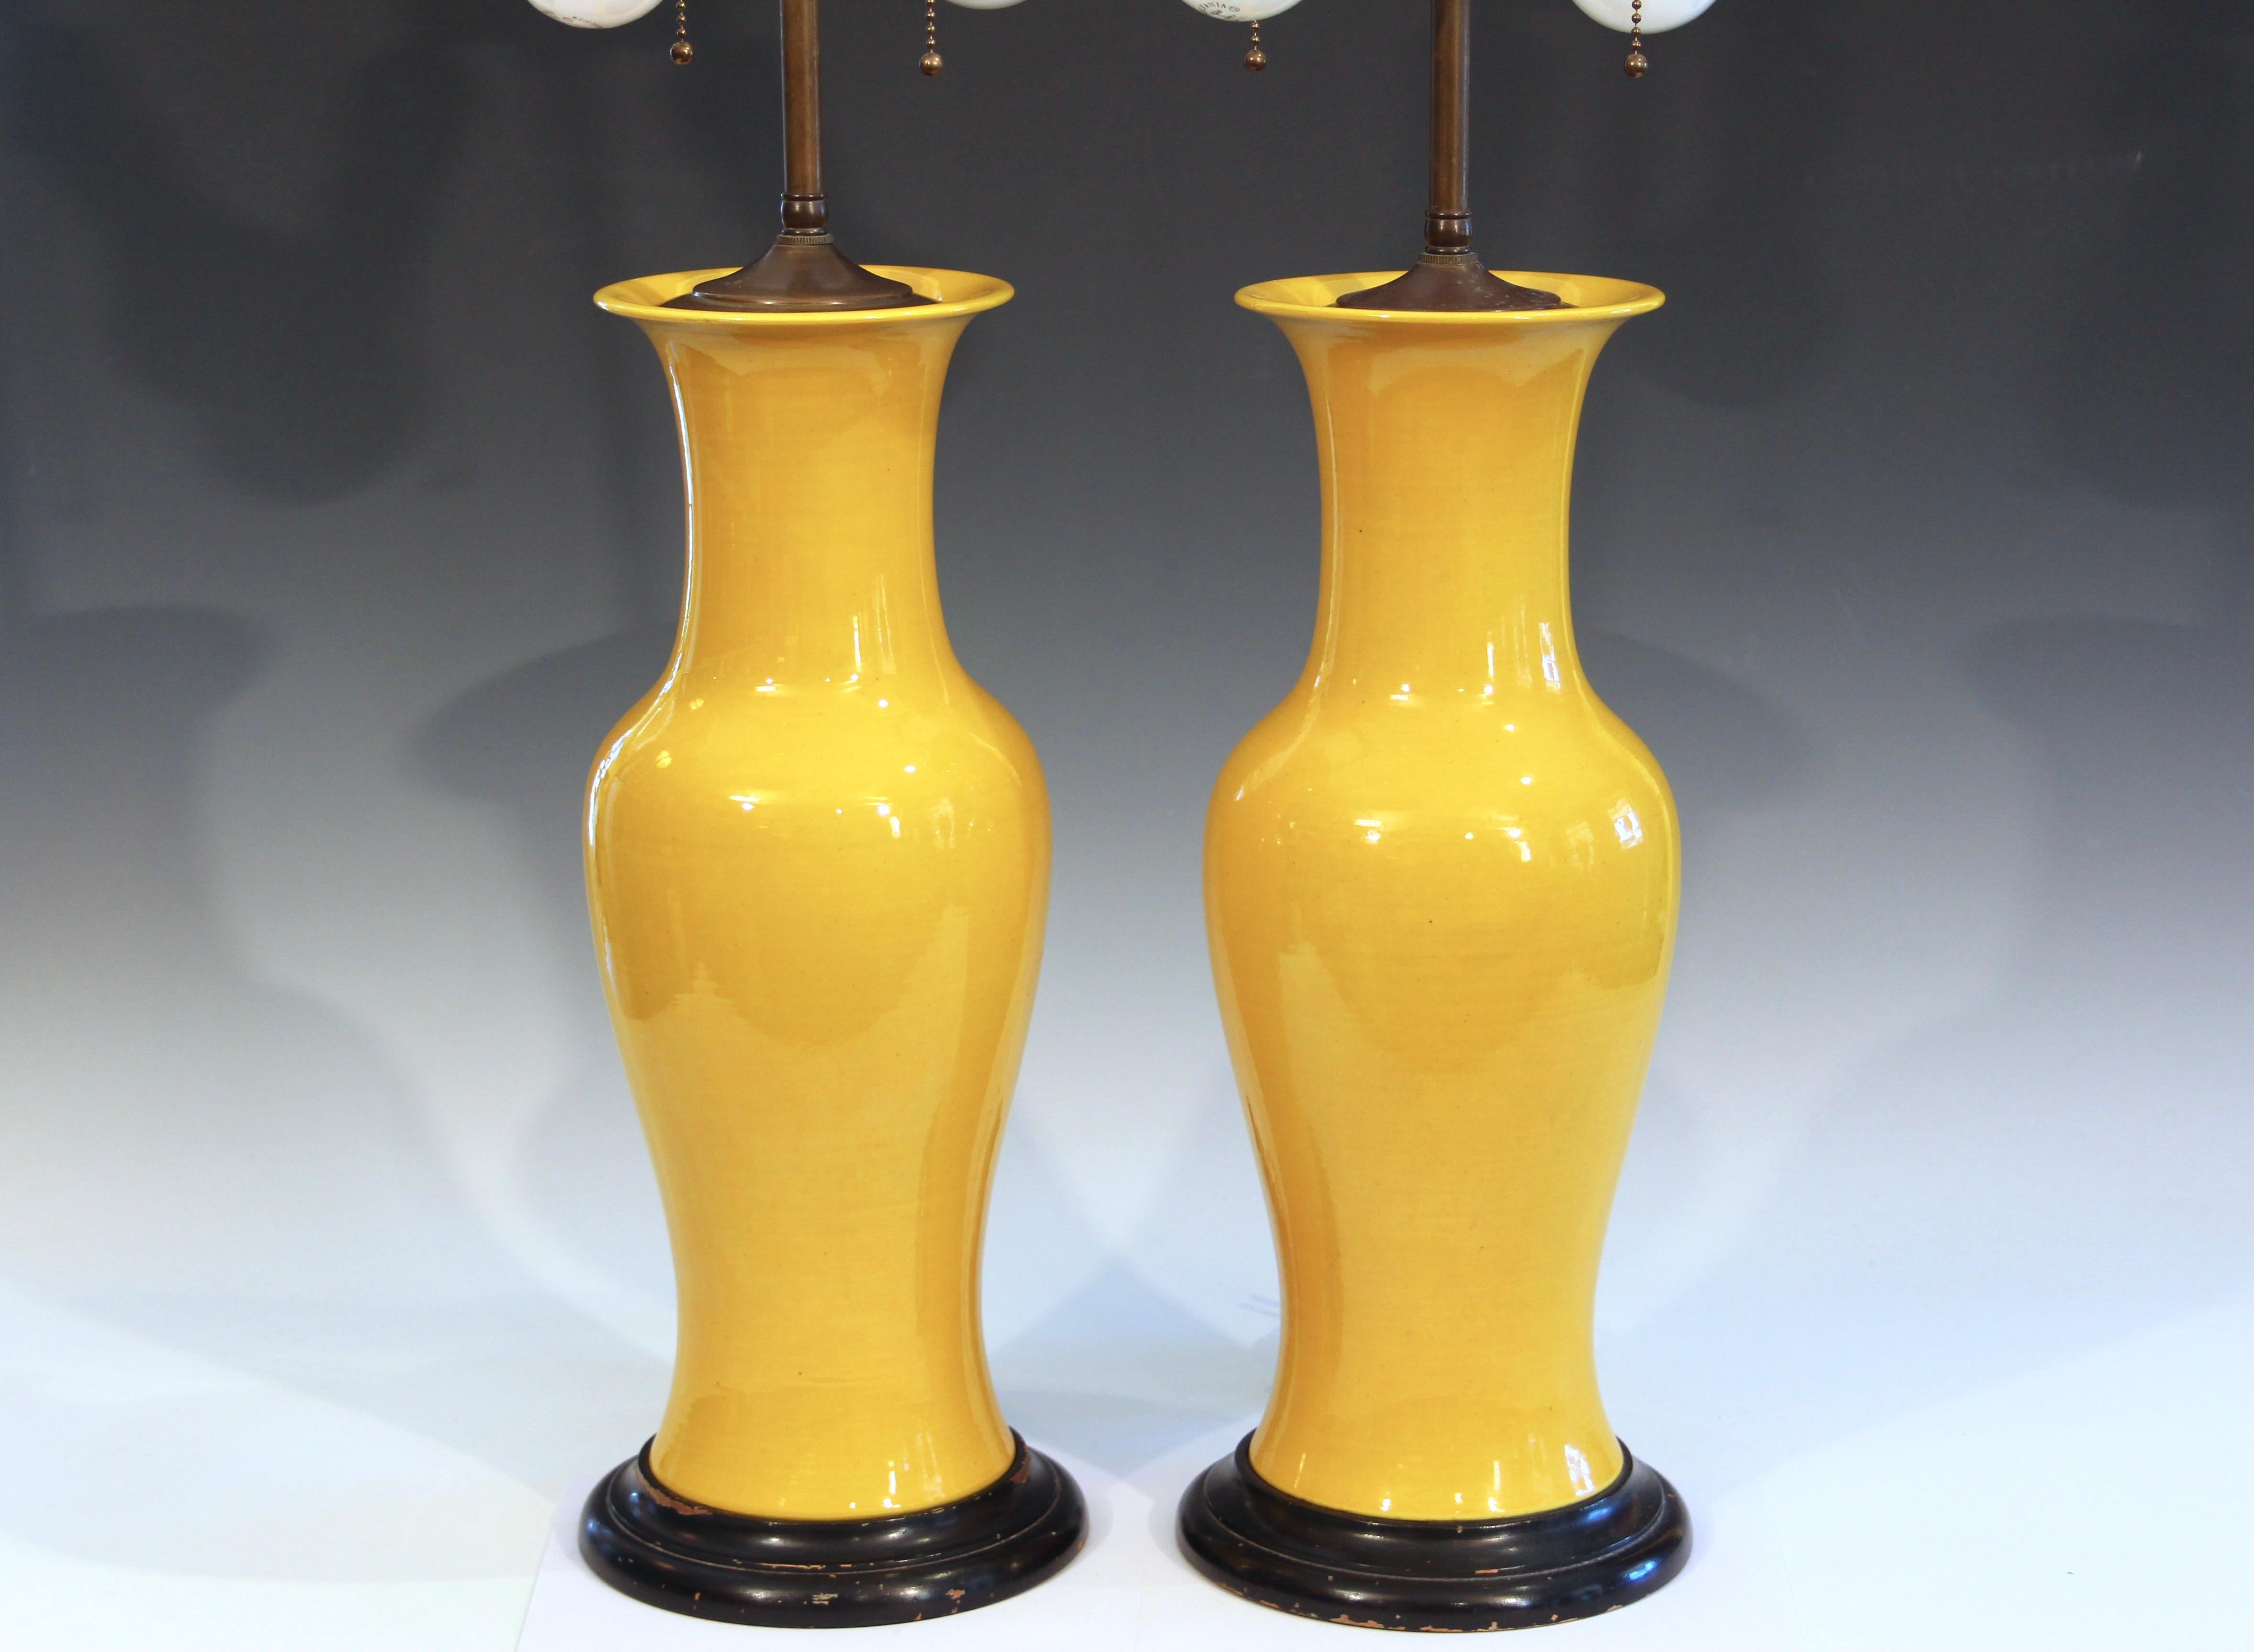 Qing Pair Japanese Porcelain Lamp Vases Yellow Monochrome Vintage 1960s Table Crackle For Sale